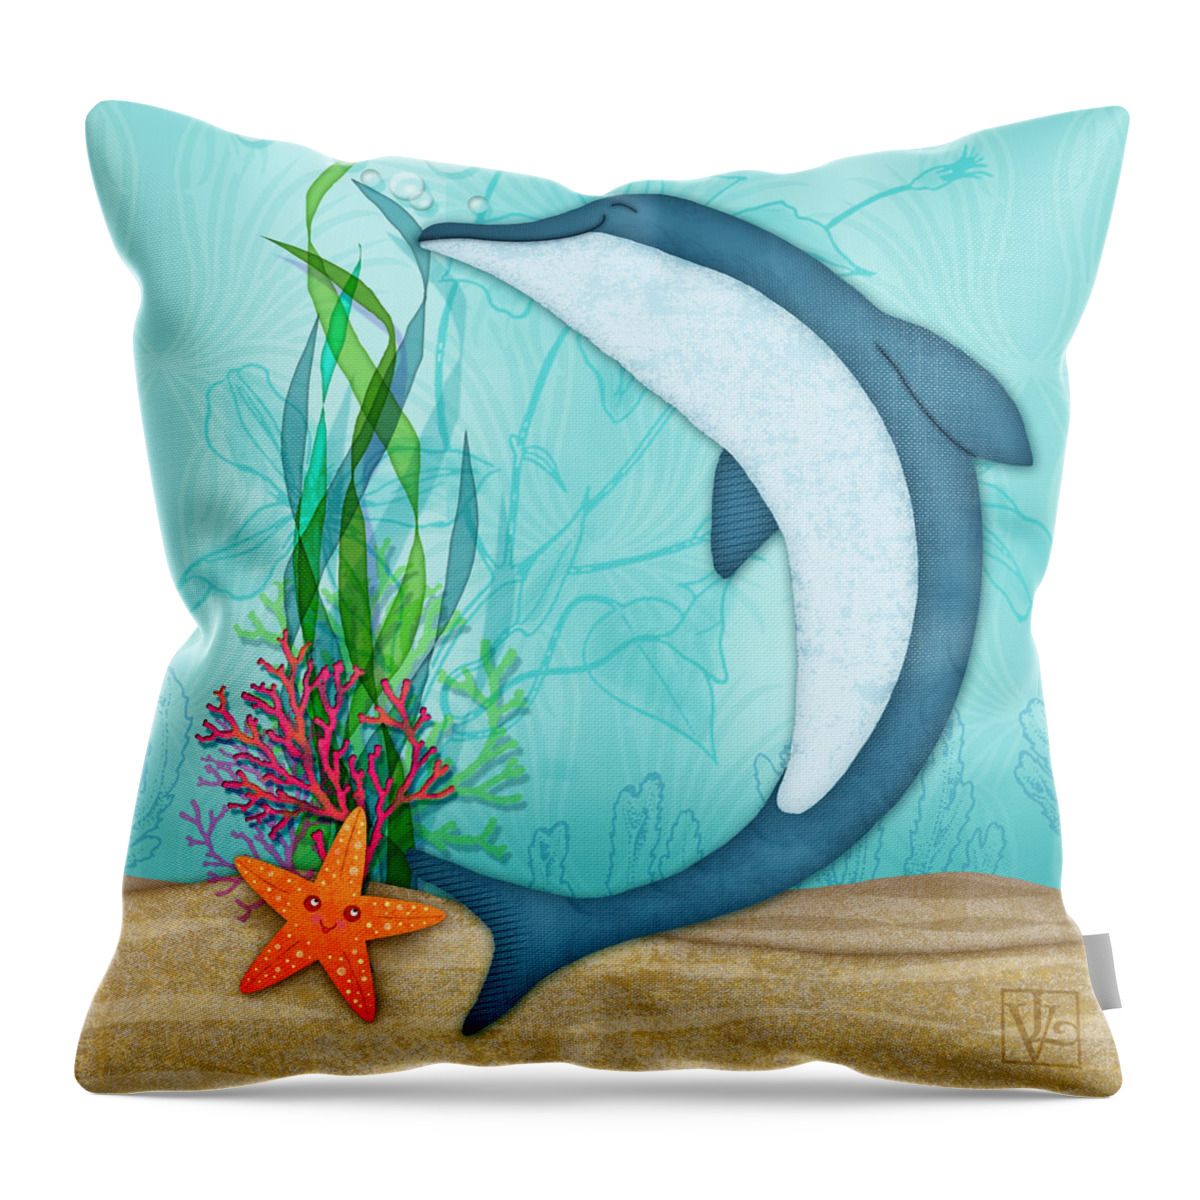 Dolphin Throw Pillow featuring the digital art The Letter D for Dolphin by Valerie Drake Lesiak